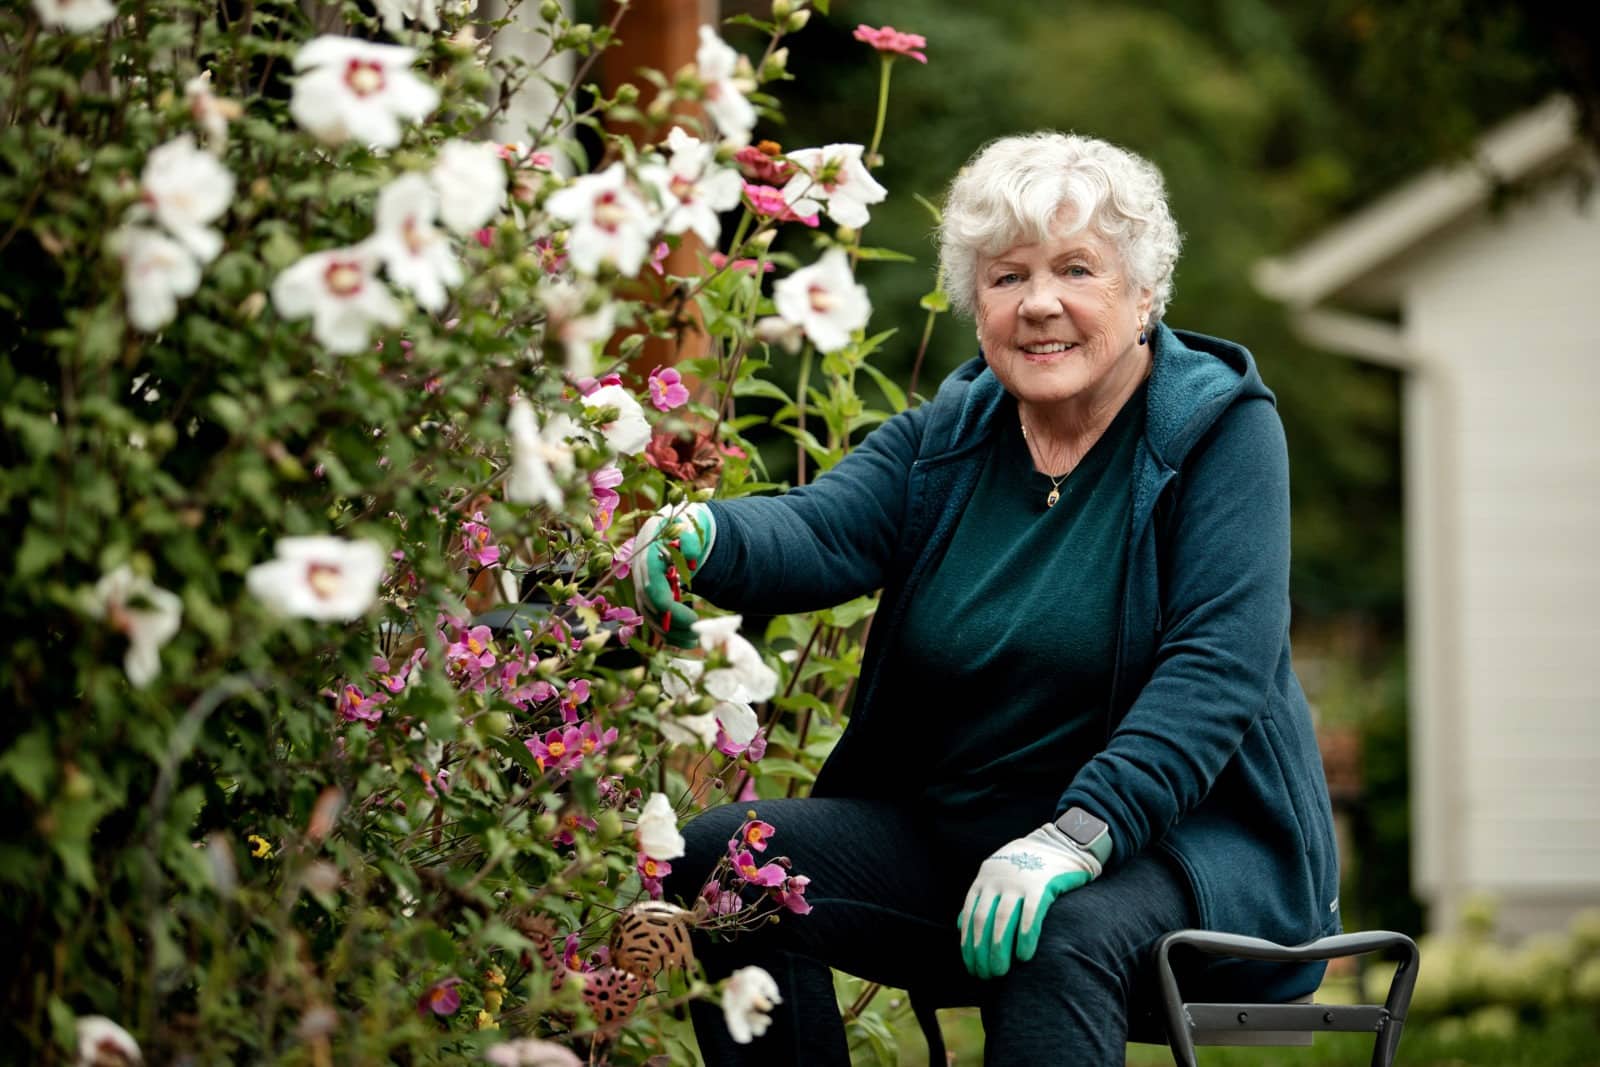 Judy Carson sits next to her garden, smiling, wearing gloves and using sheers to prune her blooms.